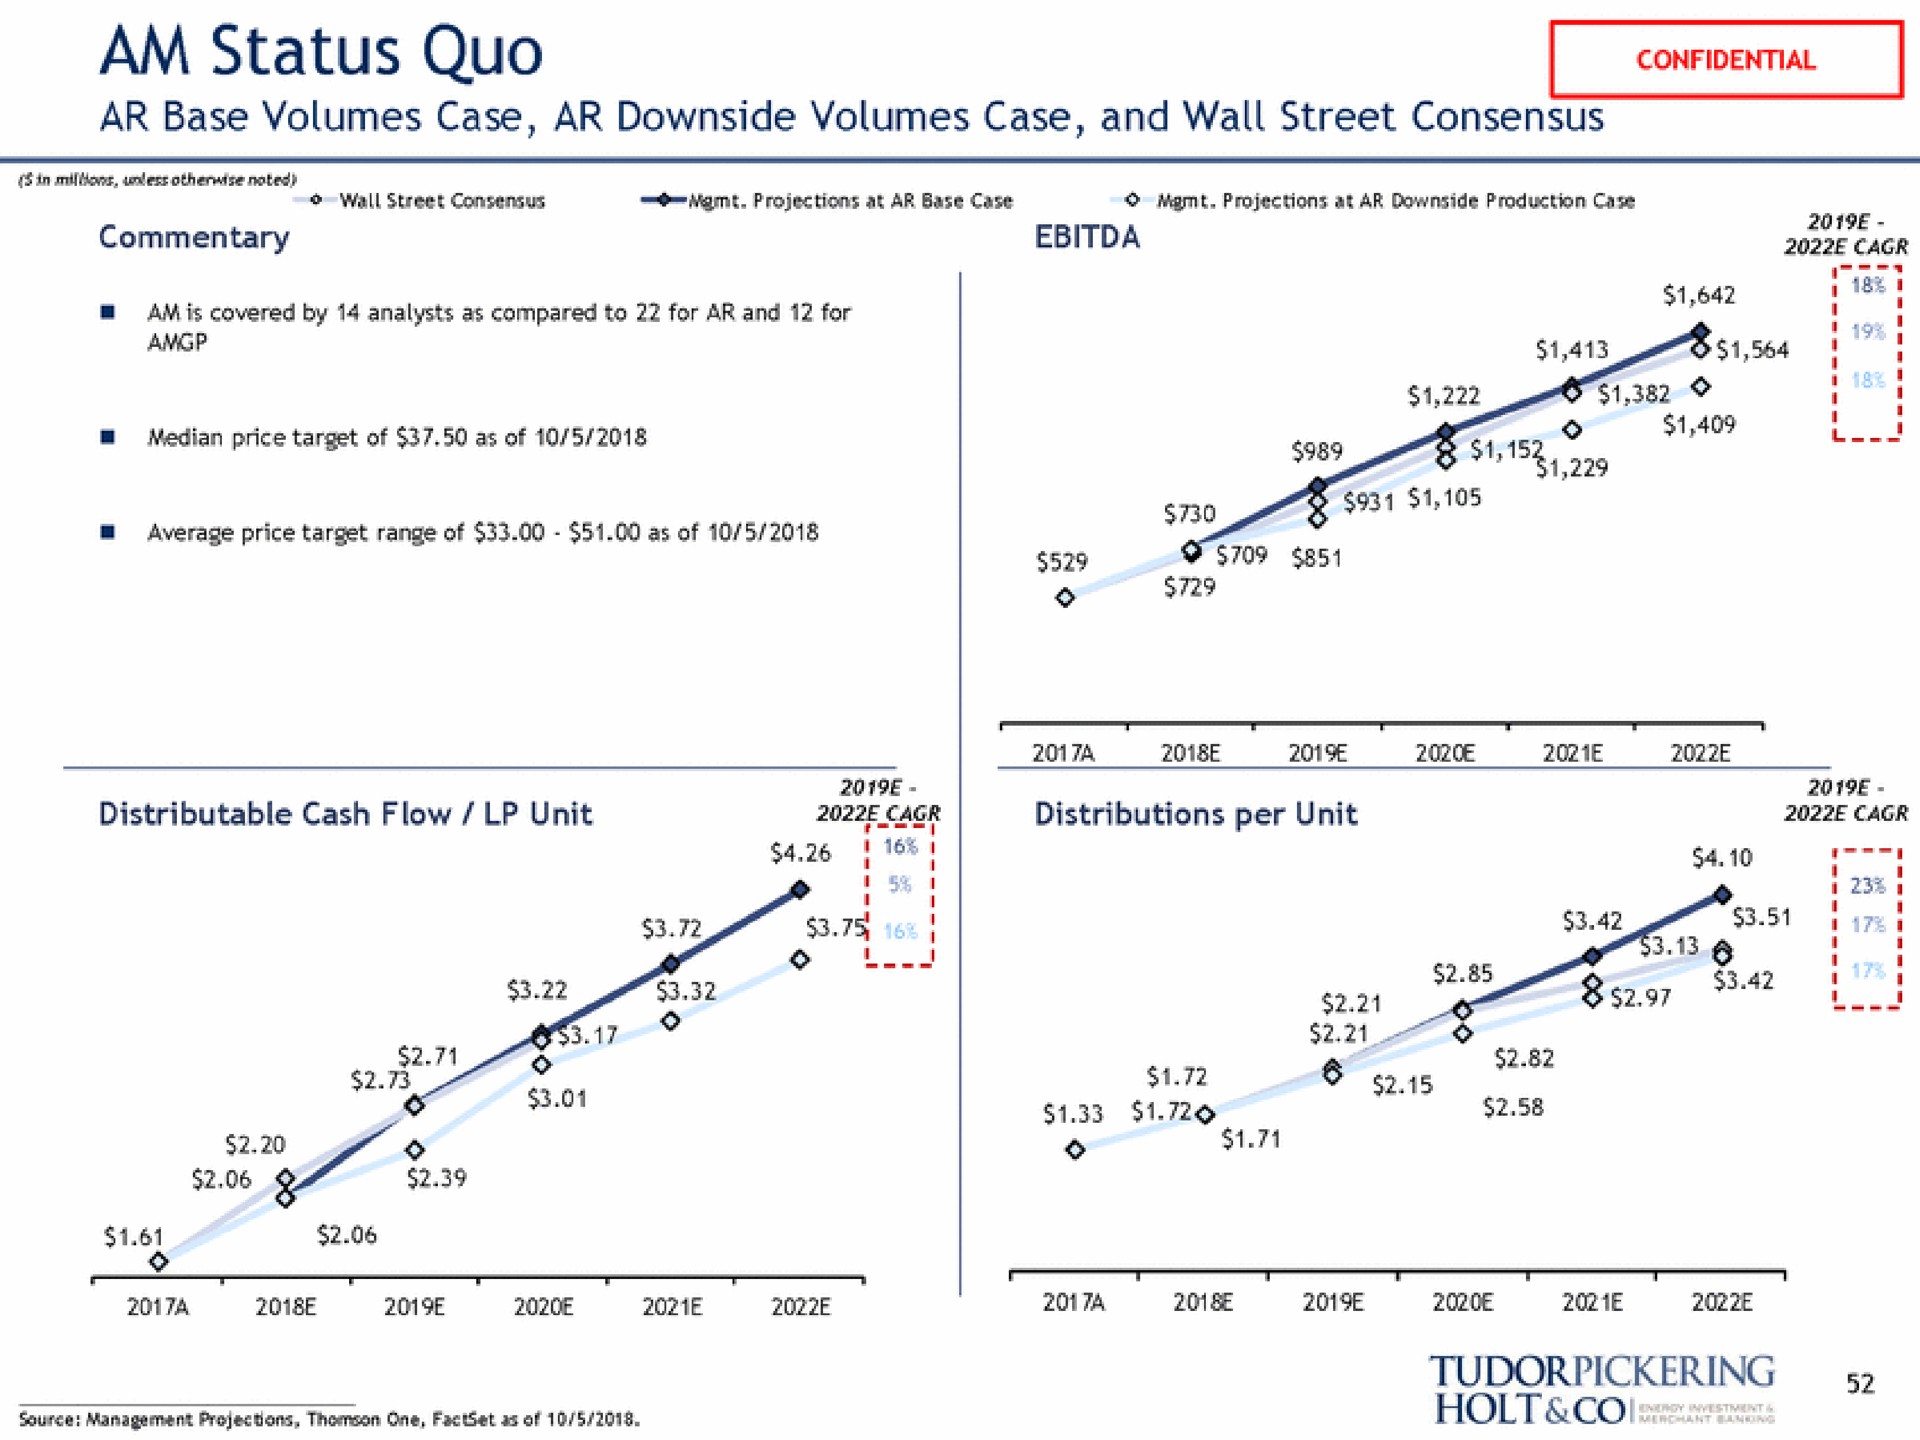 am status quo base volumes case downside volumes case and wall street consensus fag | Tudor, Pickering, Holt & Co